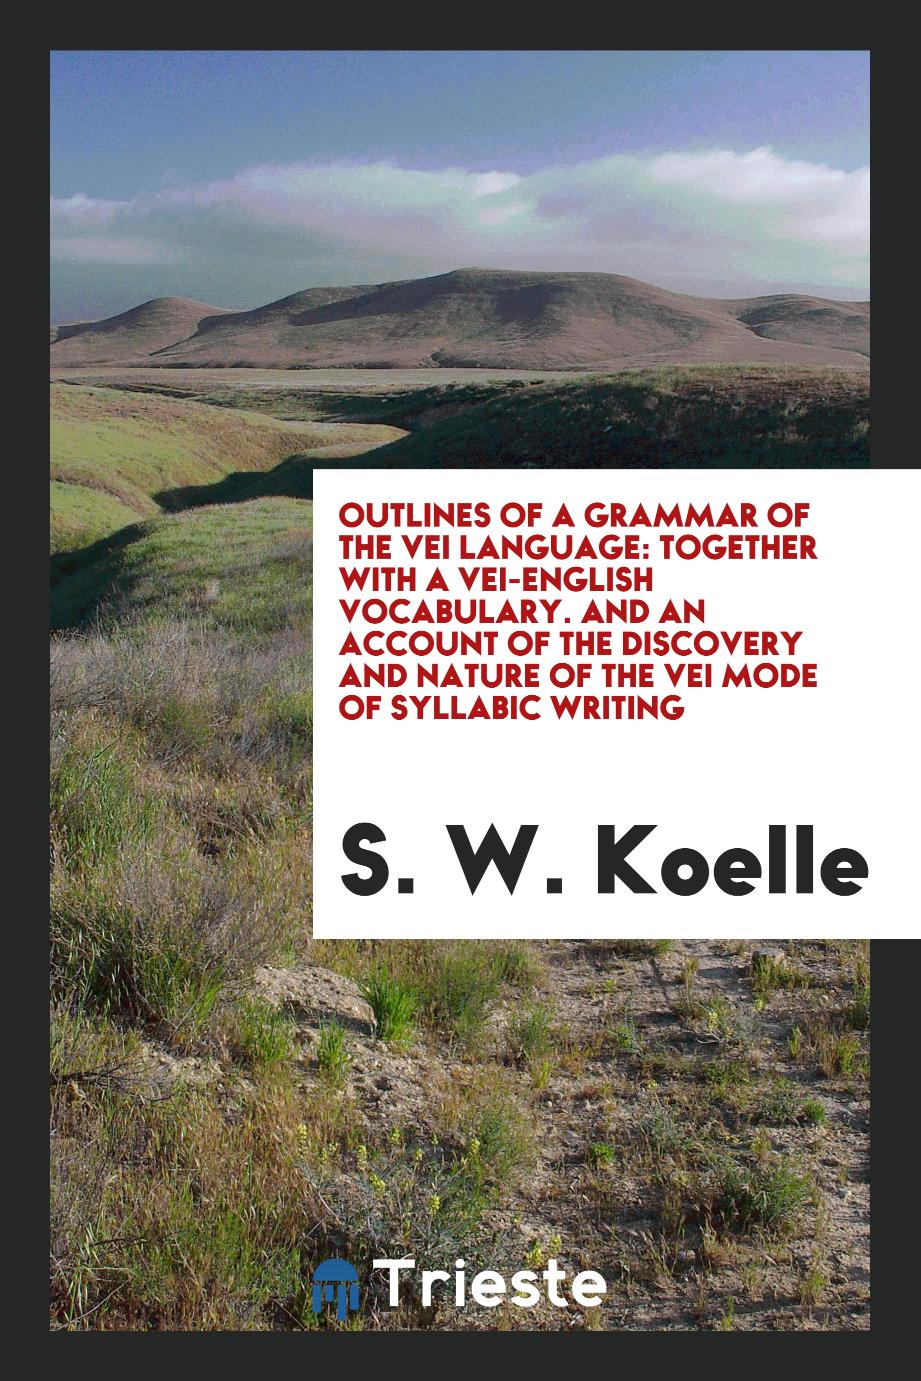 Outlines of a Grammar of the Vei Language: Together with a Vei-English Vocabulary. And an Account of the Discovery and Nature of the Vei Mode of Syllabic Writing